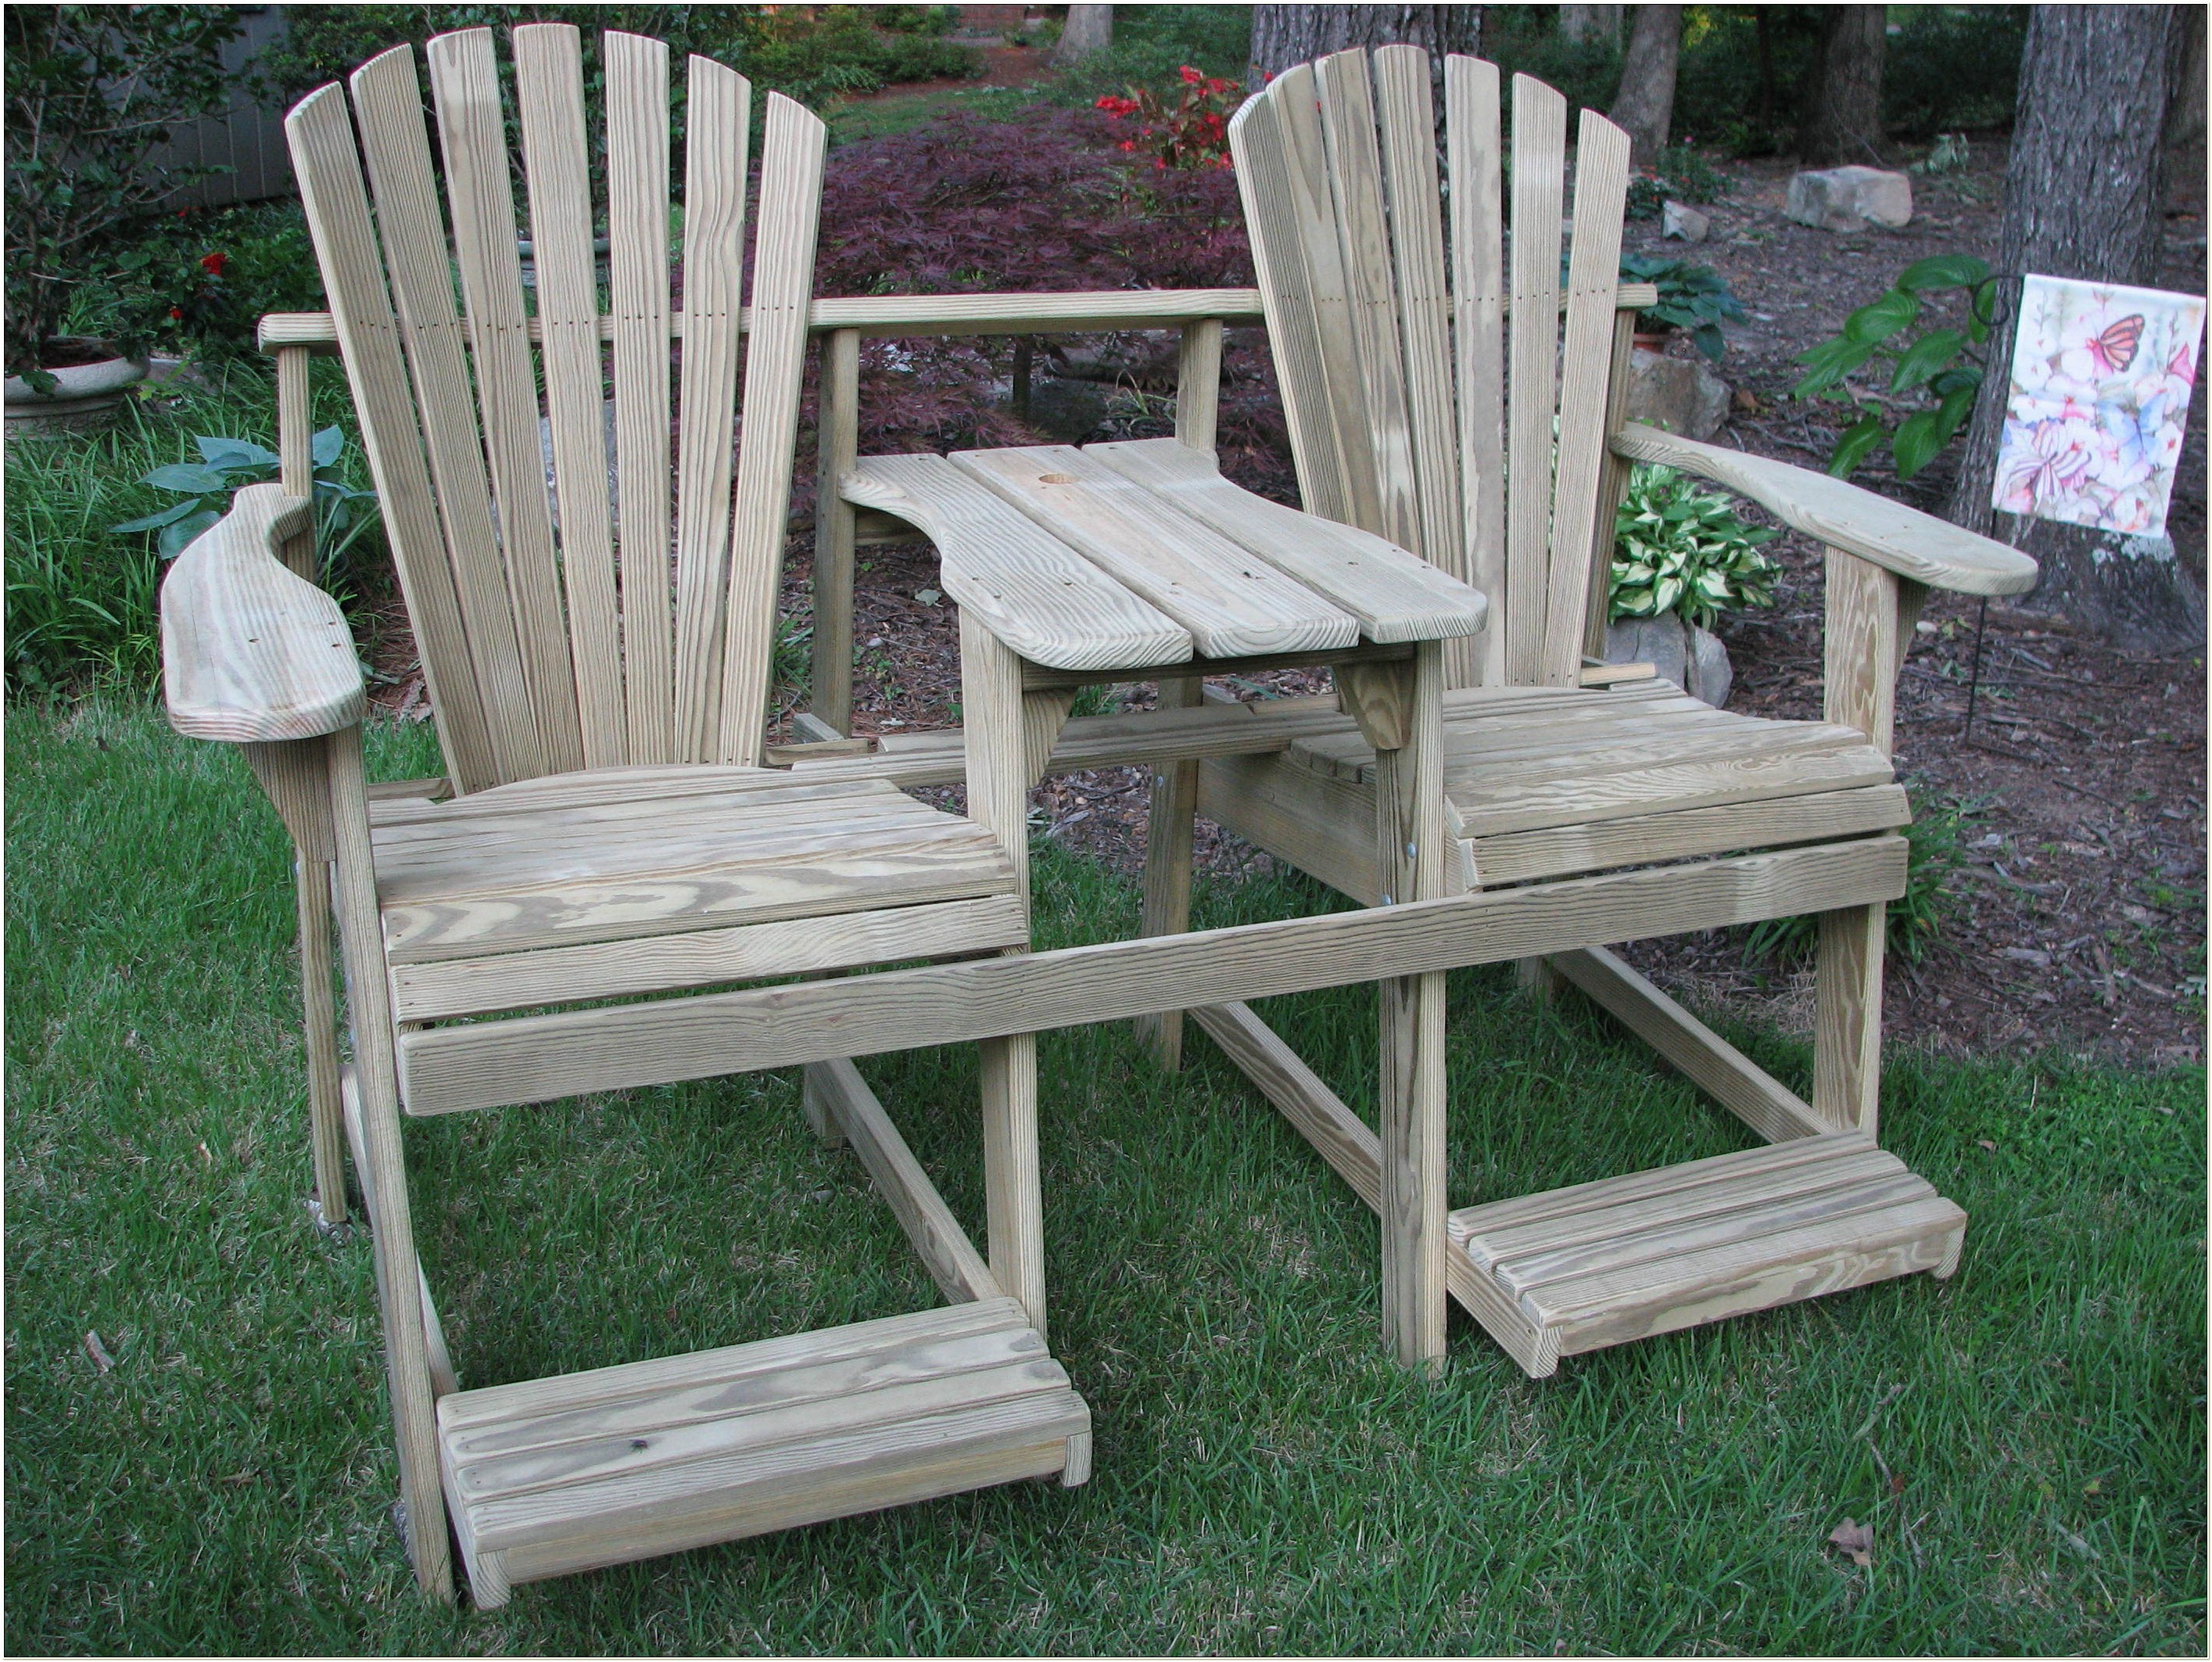 Plans For Tall Adirondack Chairs - Chairs : Home Decorating Ideas # 